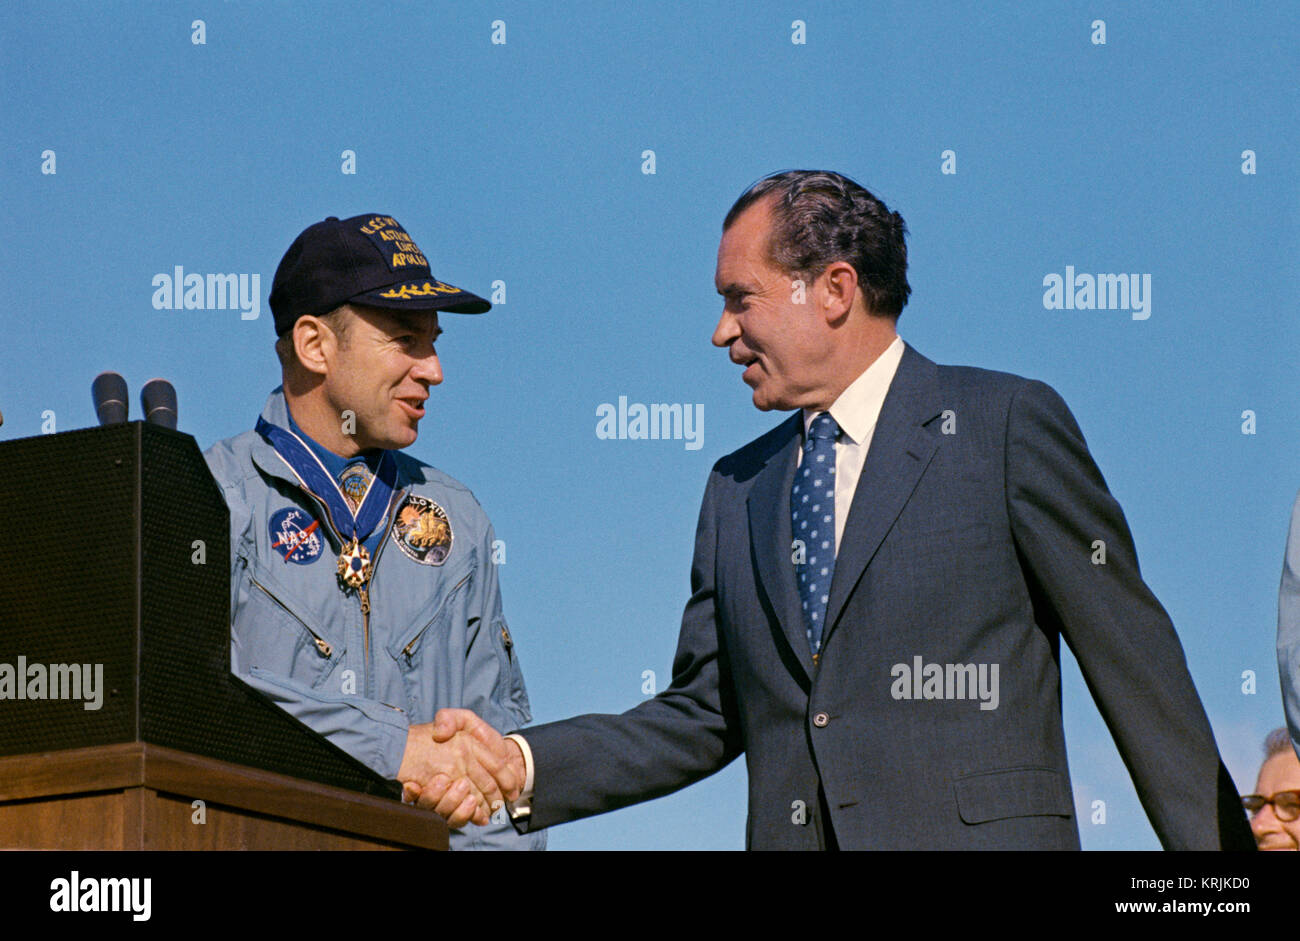 U.S. President Richard Nixon presents NASA Apollo 13 lunar orbital mission prime crew astronaut James Lovell Jr. with the Presidential Medal of Freedom at the Hickam Air Force Base April 18, 1970 in Pearl Harbor, Hawaii. Stock Photo